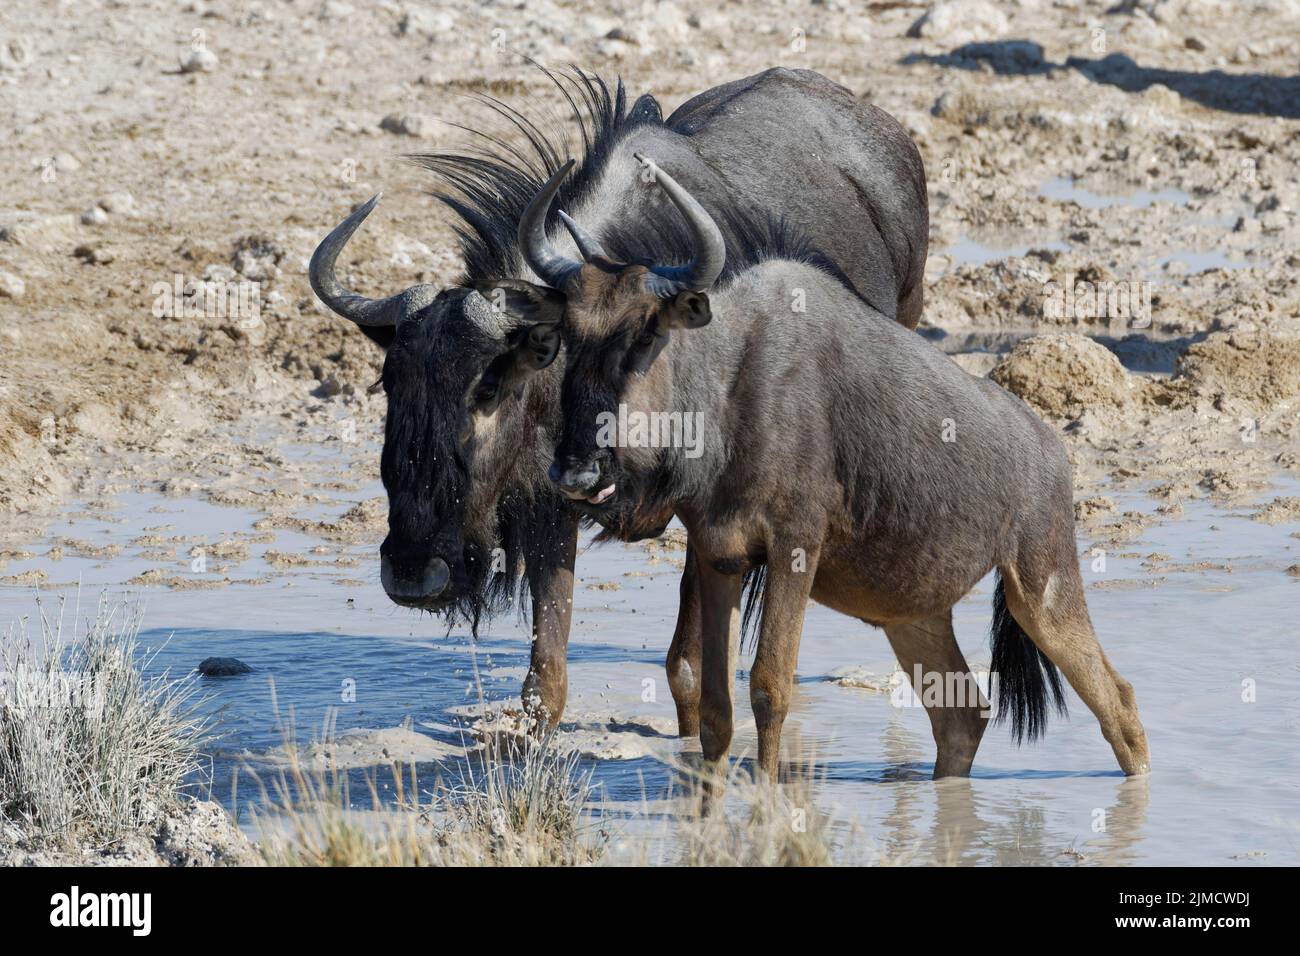 Blue wildebeests (Connochaetes taurinus), adult and young, in water, drinking at waterhole, Etosha National Park, Namibia, Africa Stock Photo